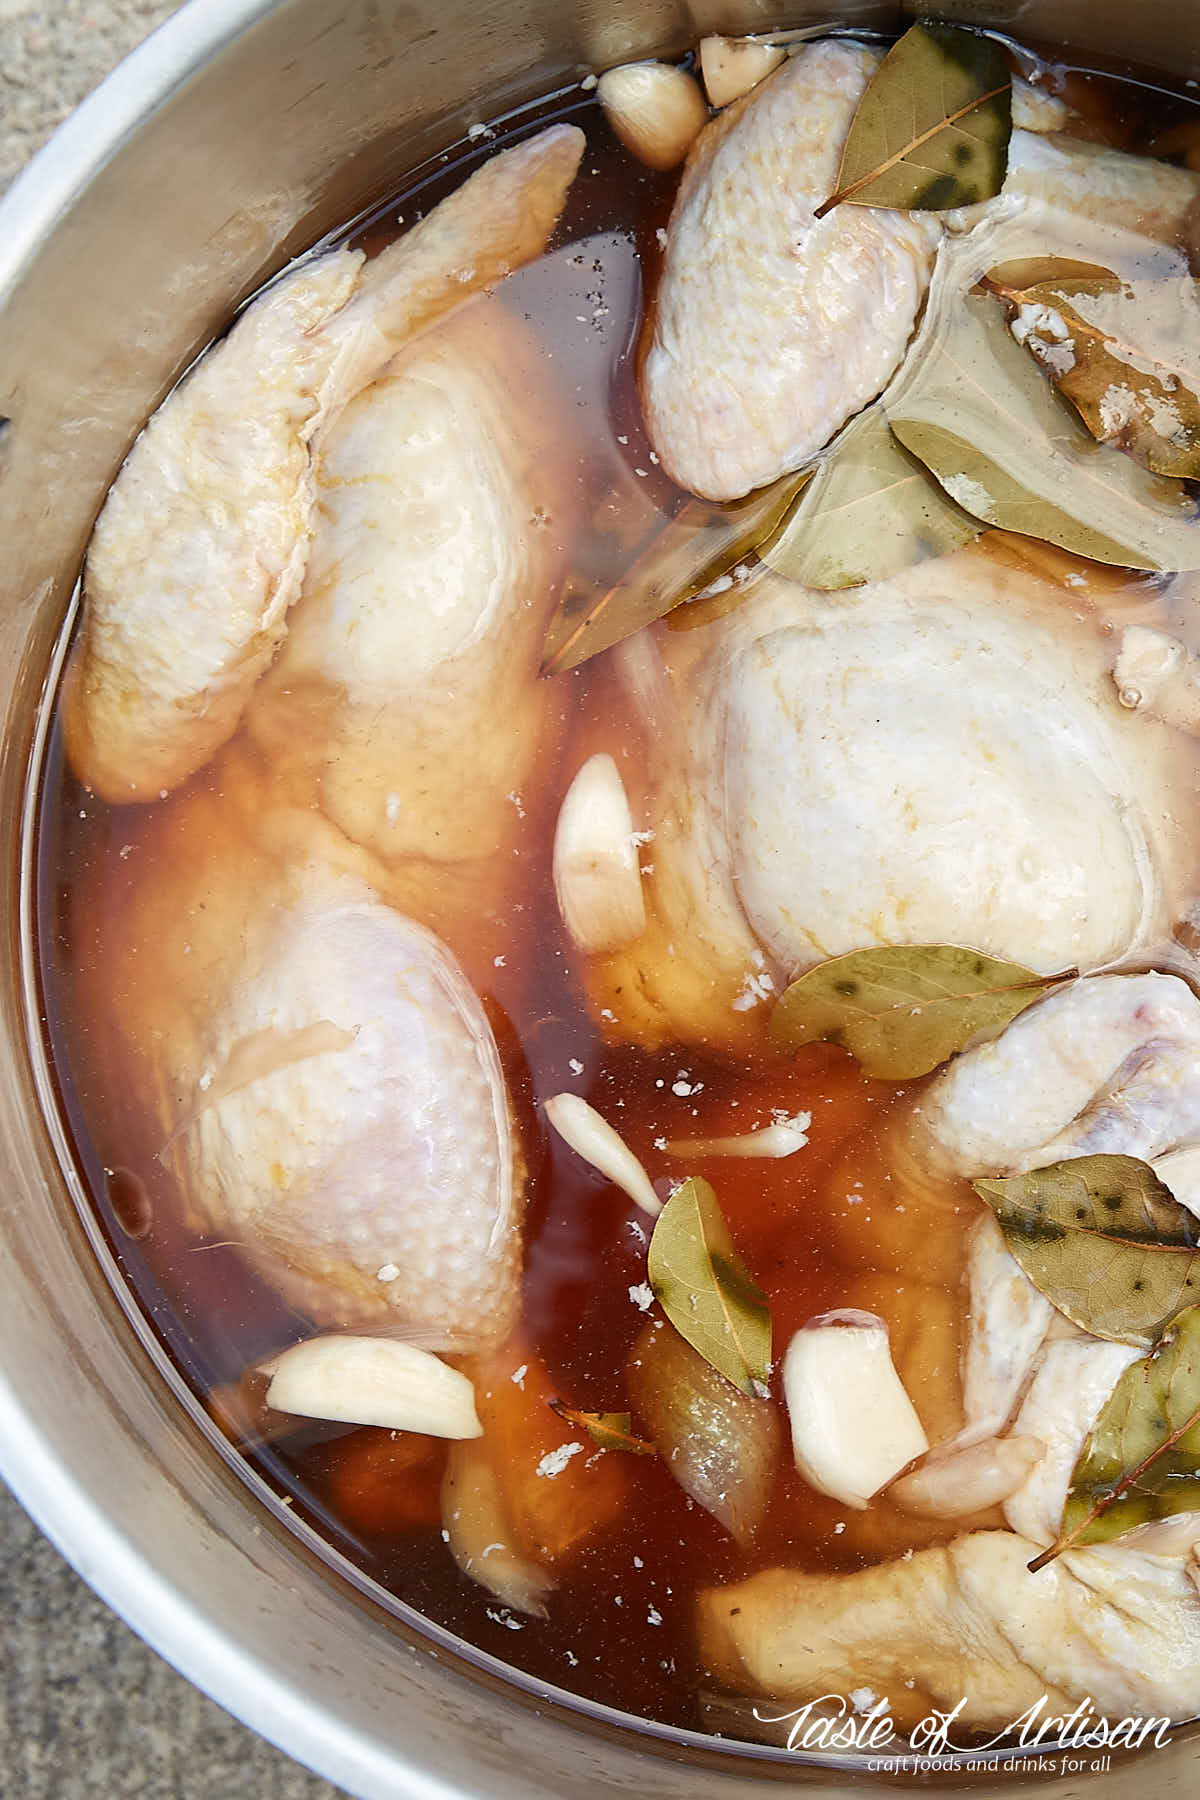 How To Brine Chicken Taste Of Artisan,What To Wear At A Funeral In The Summer